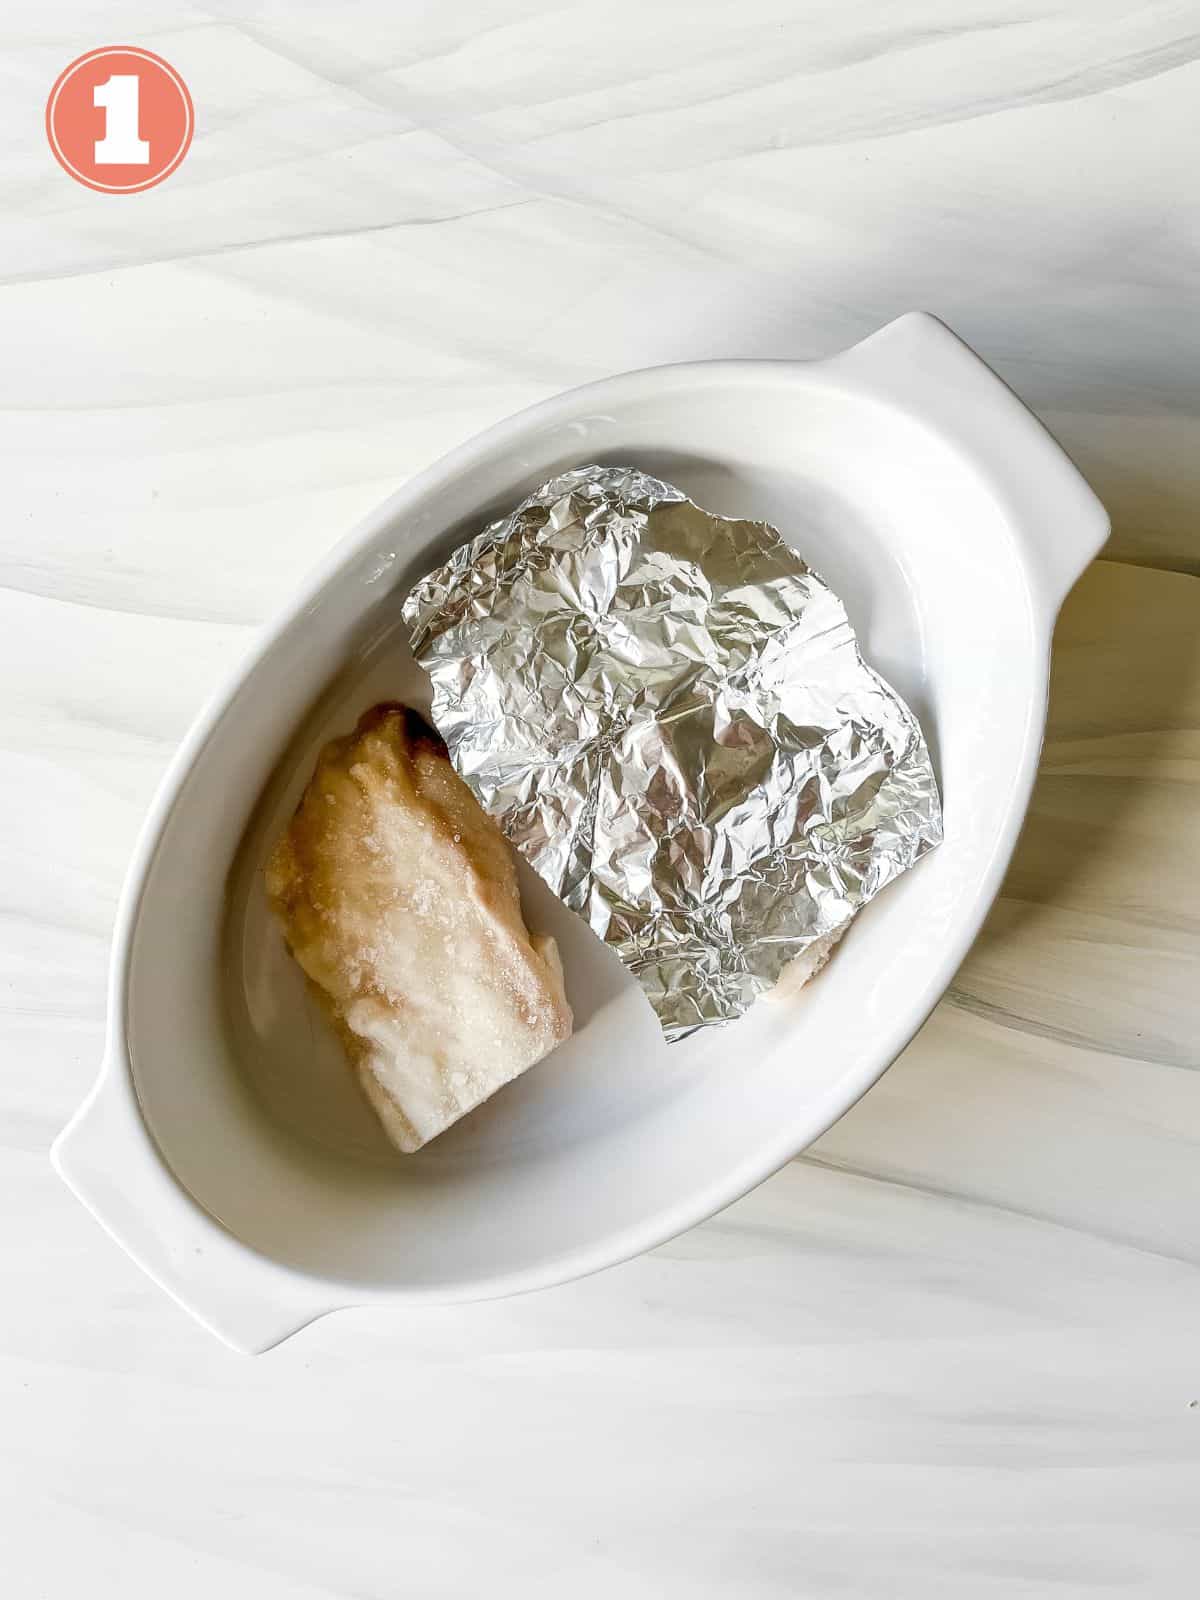 cod fillets in a white dish with one covered by aluminium foil labelled number one.